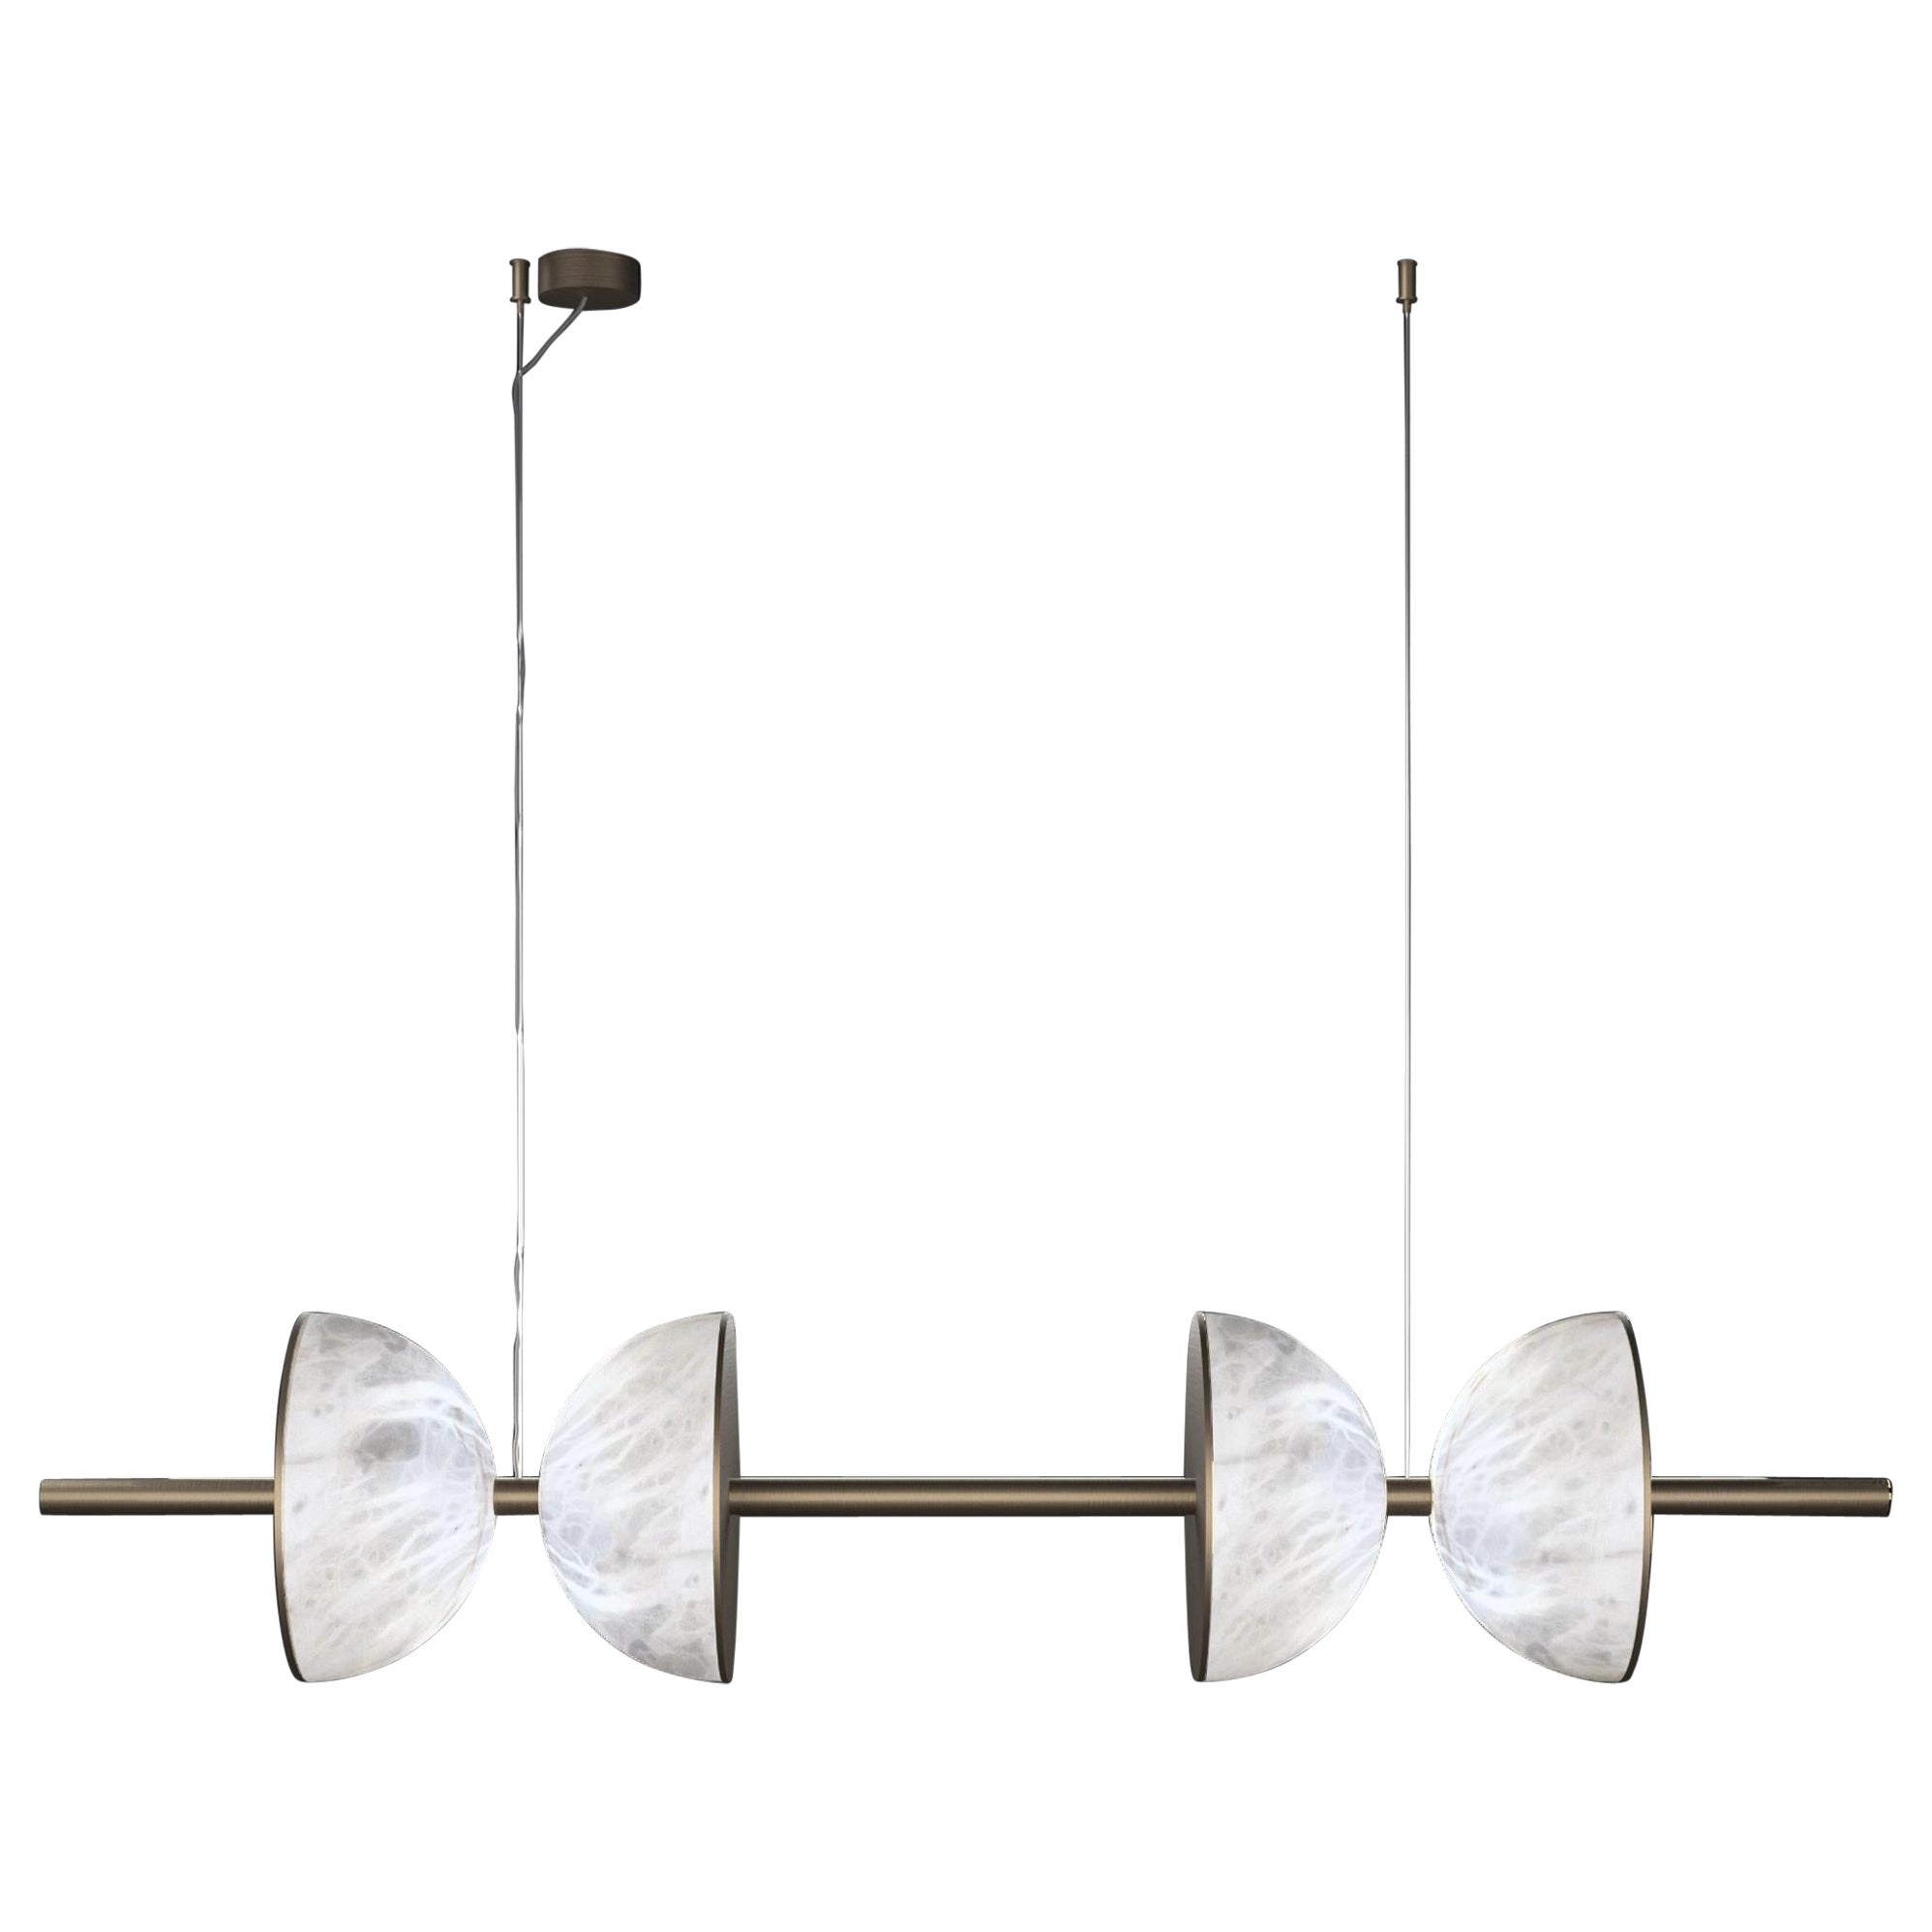 Ermes Burnished Metal And Alabaster Pendant Light 2 by Alabastro Italiano